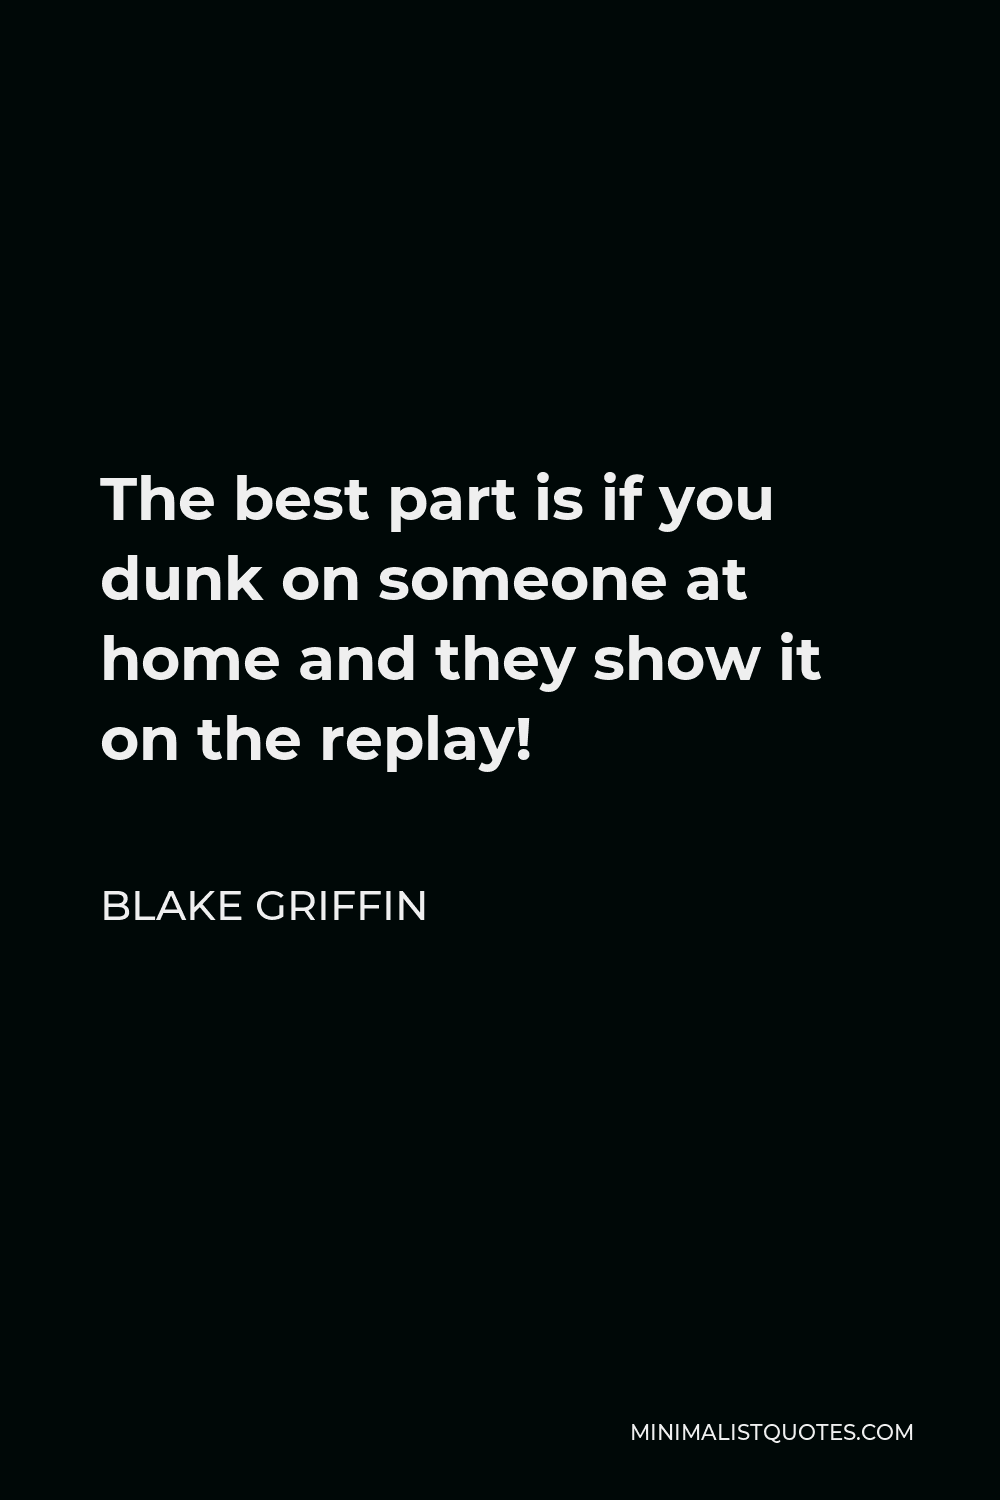 Blake Griffin Quote - The best part is if you dunk on someone at home and they show it on the replay!